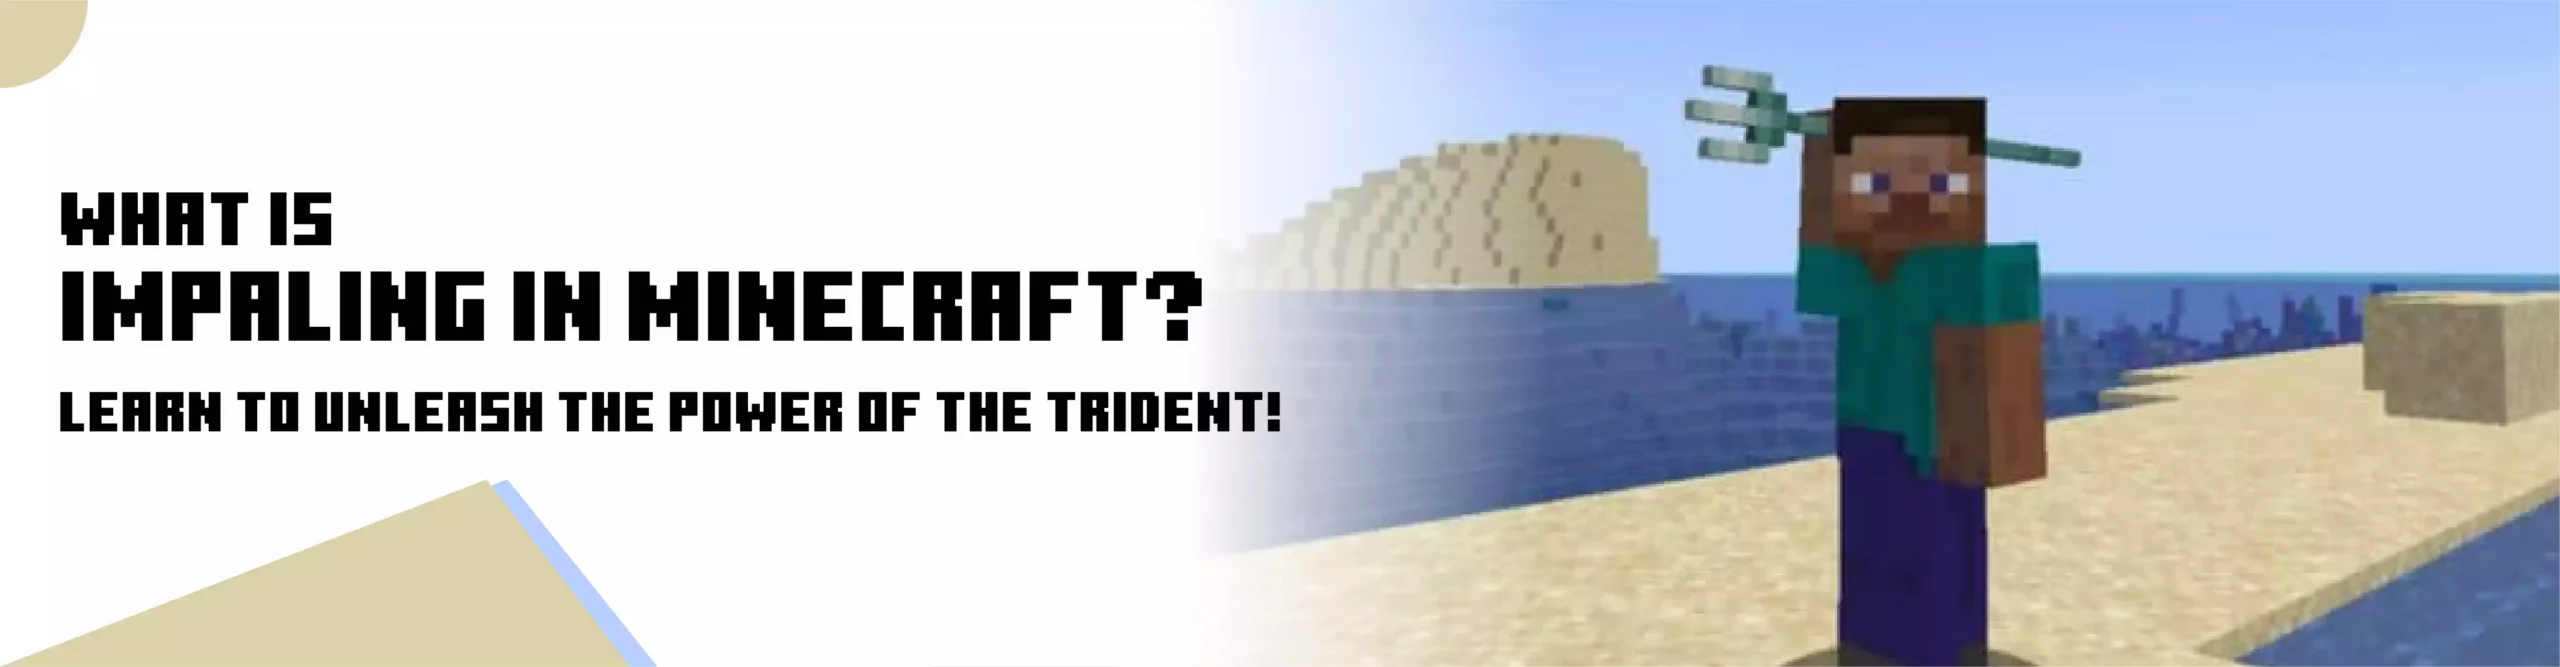 Unleash The Power Of The Trident in minecraft